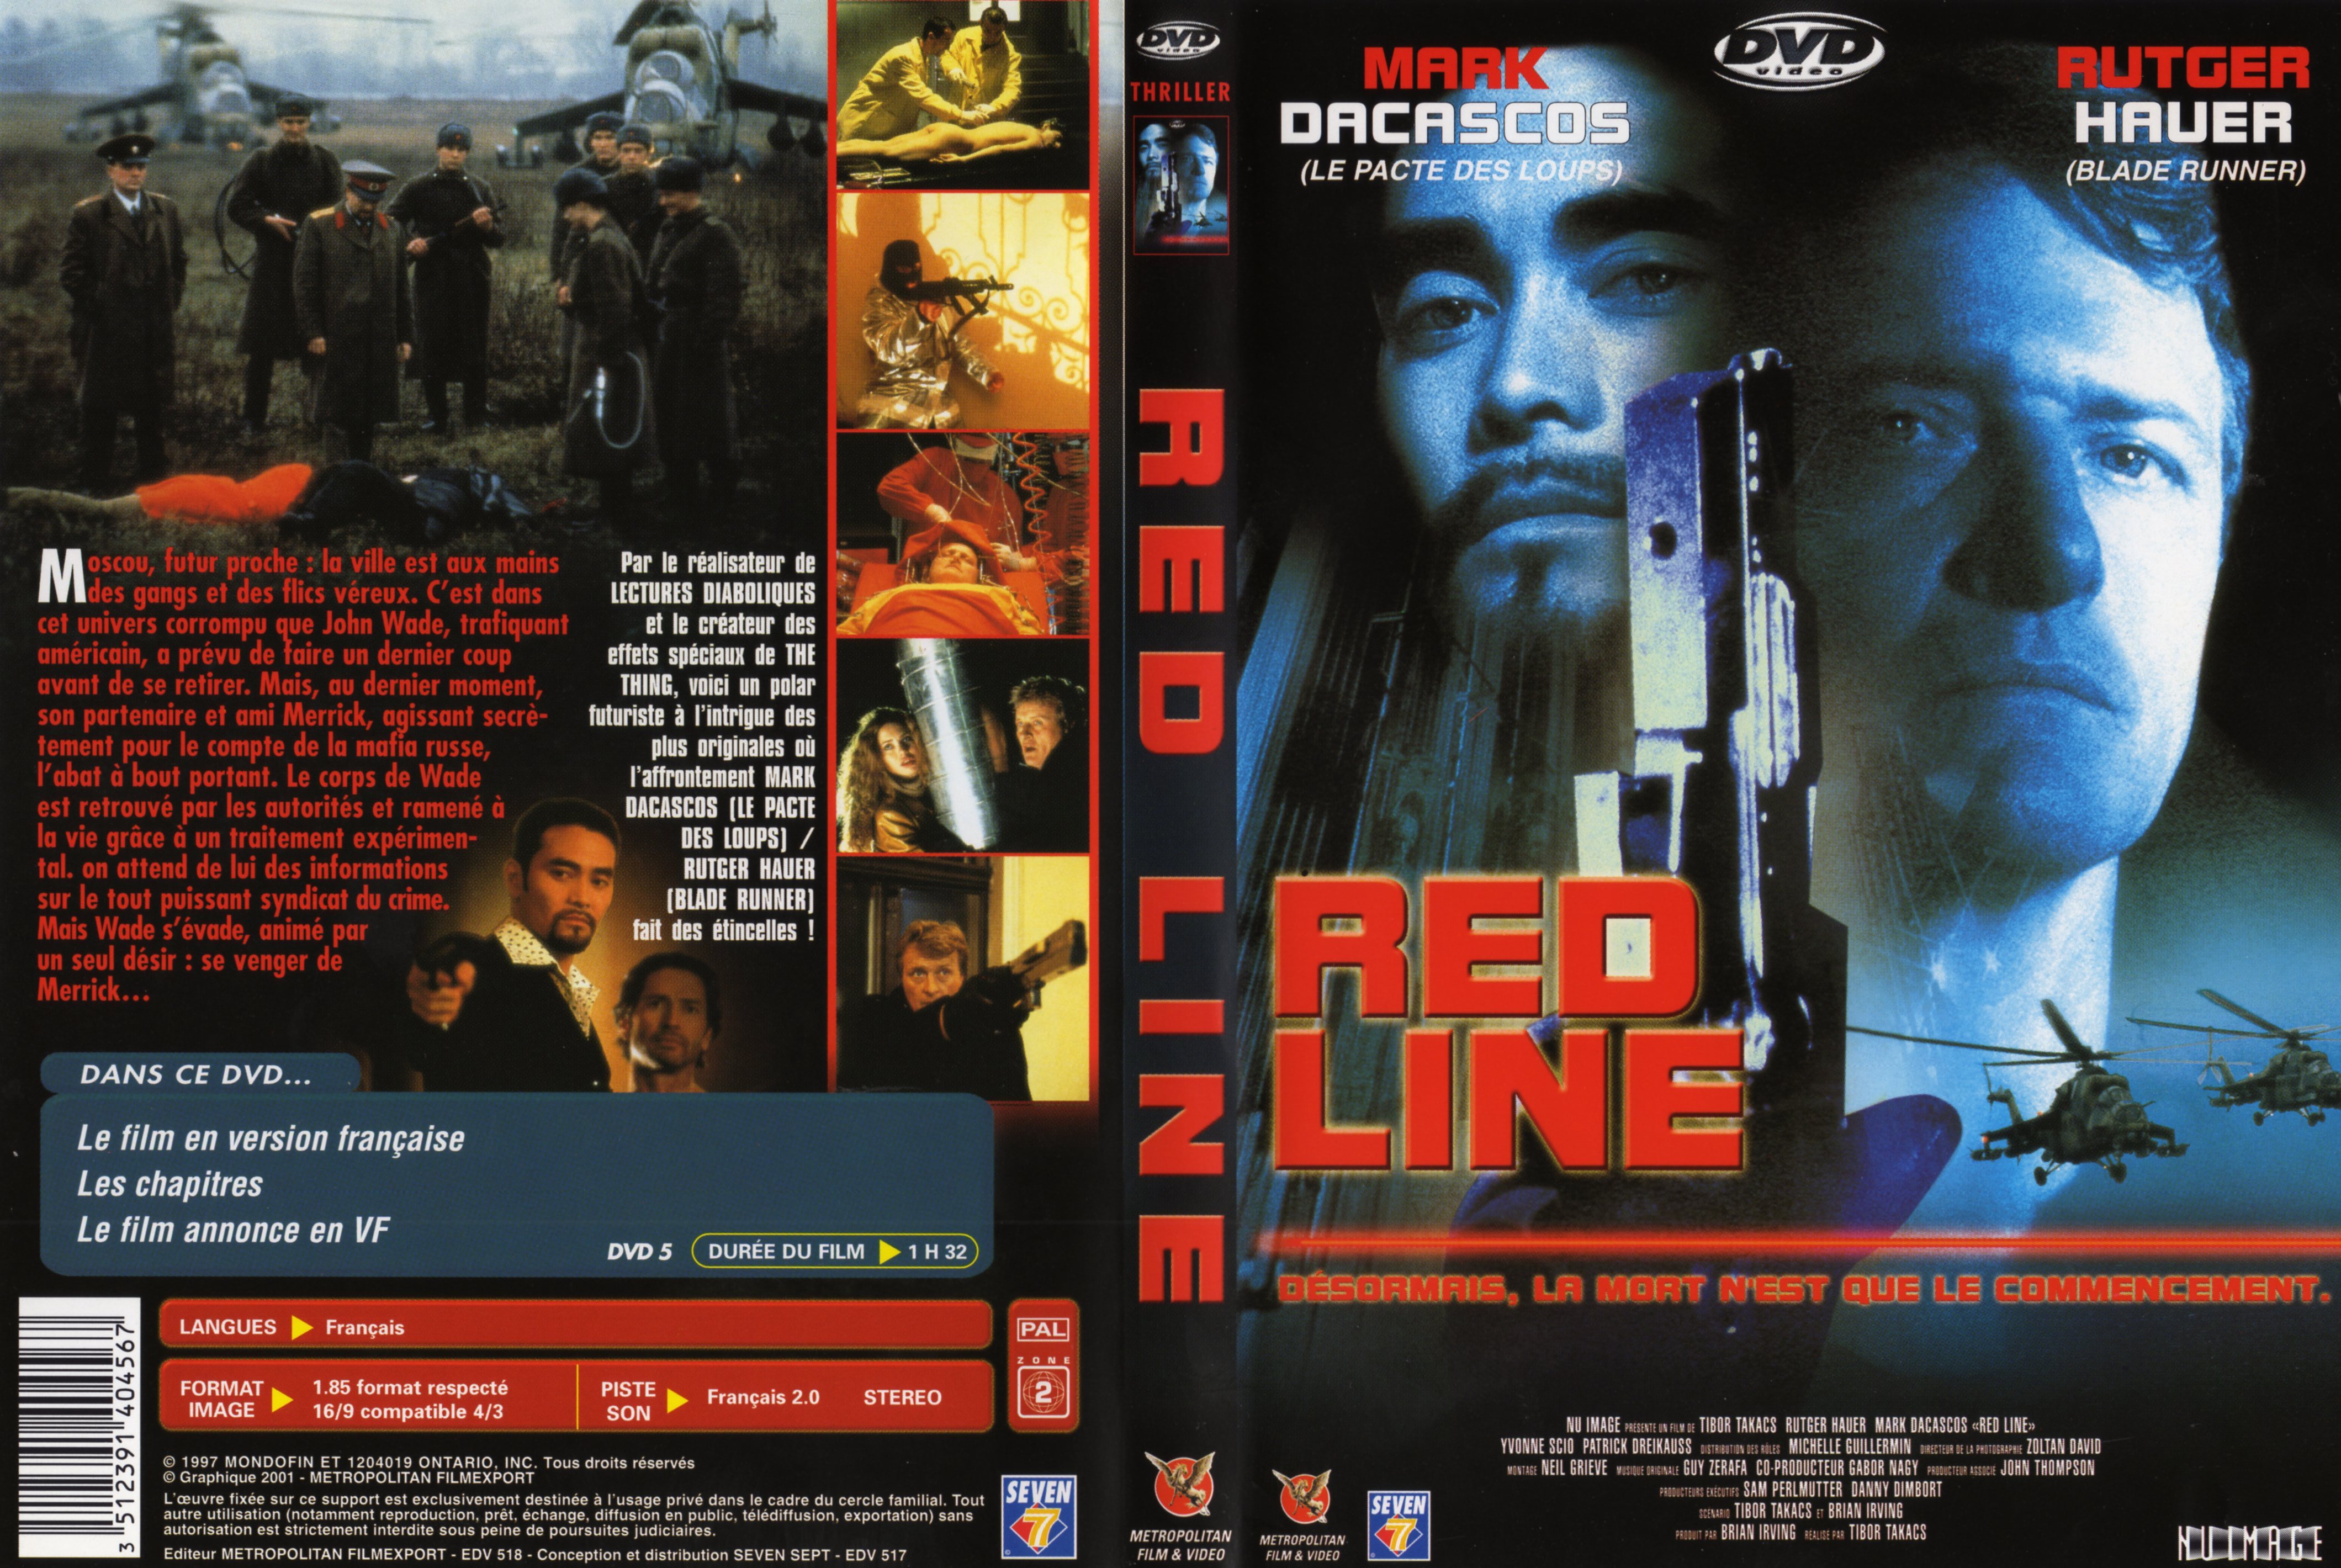 Jaquette DVD Red line